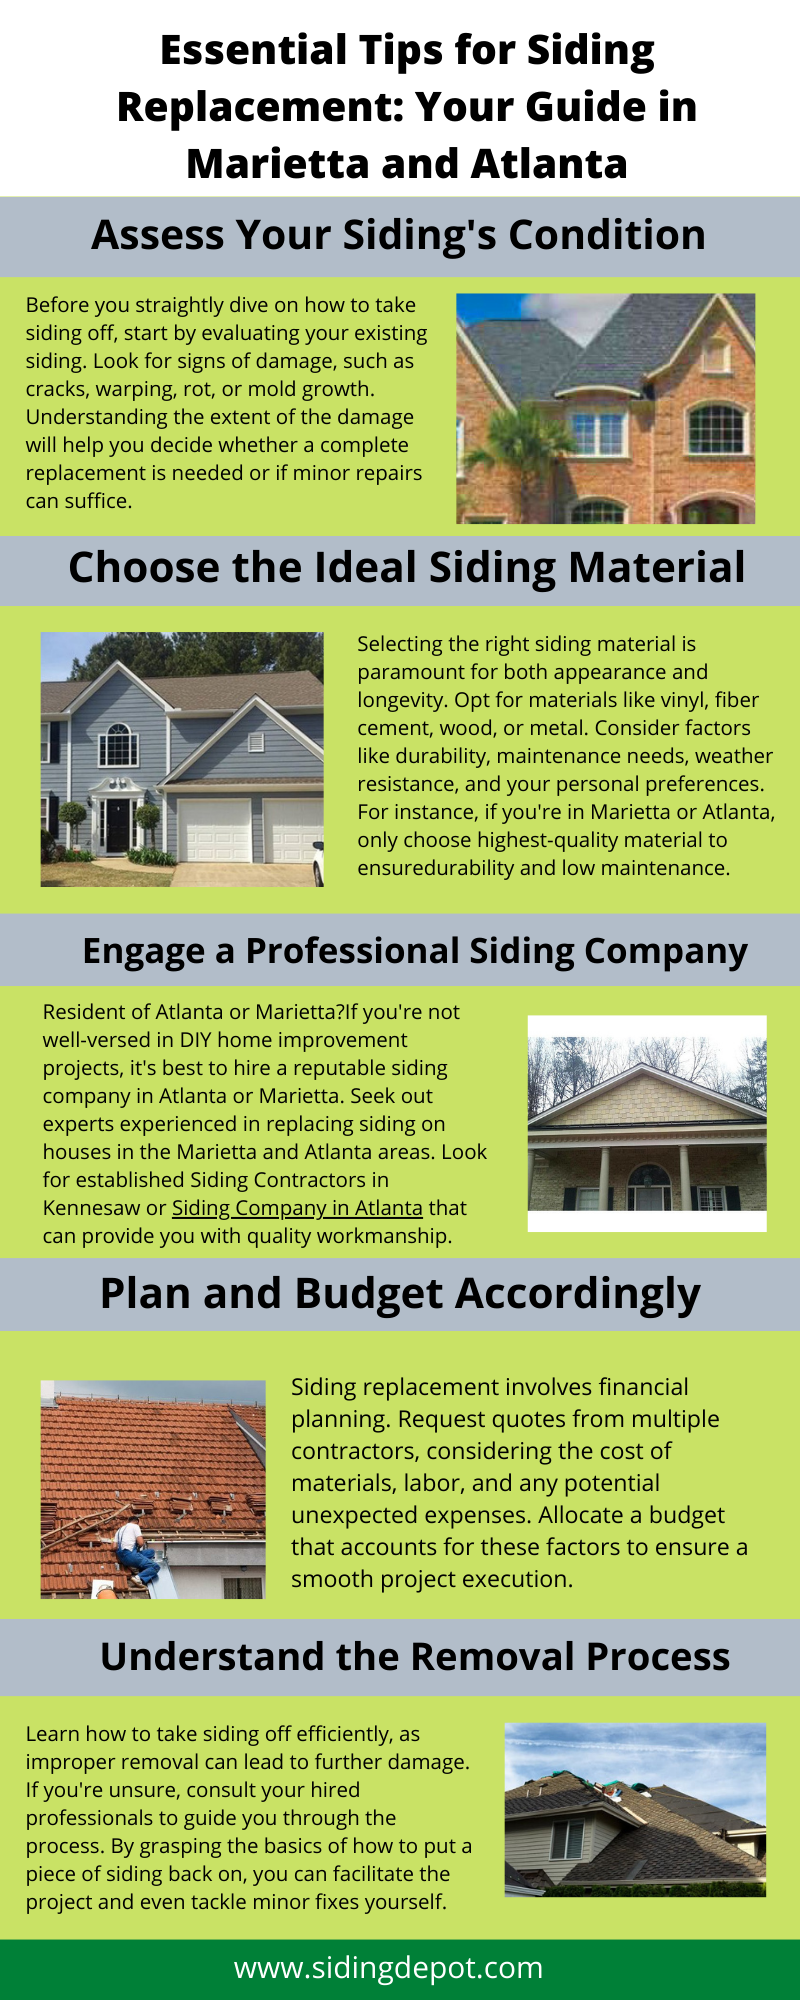 Essential Tips for Siding Replacement